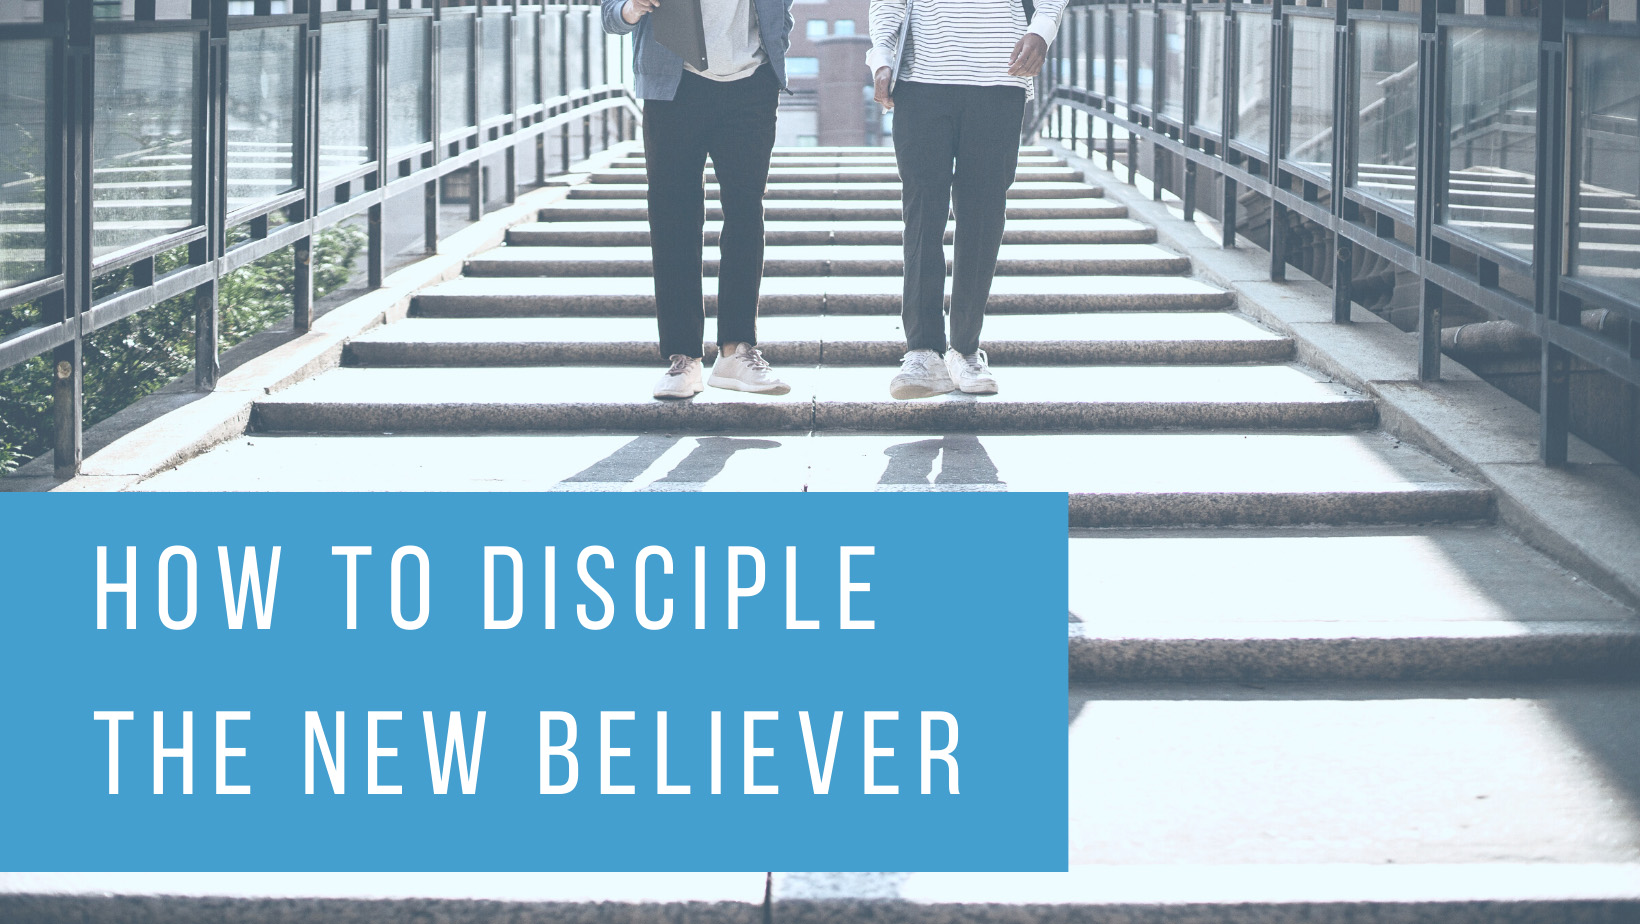 How to Disciple the New Believer Step-by-Step